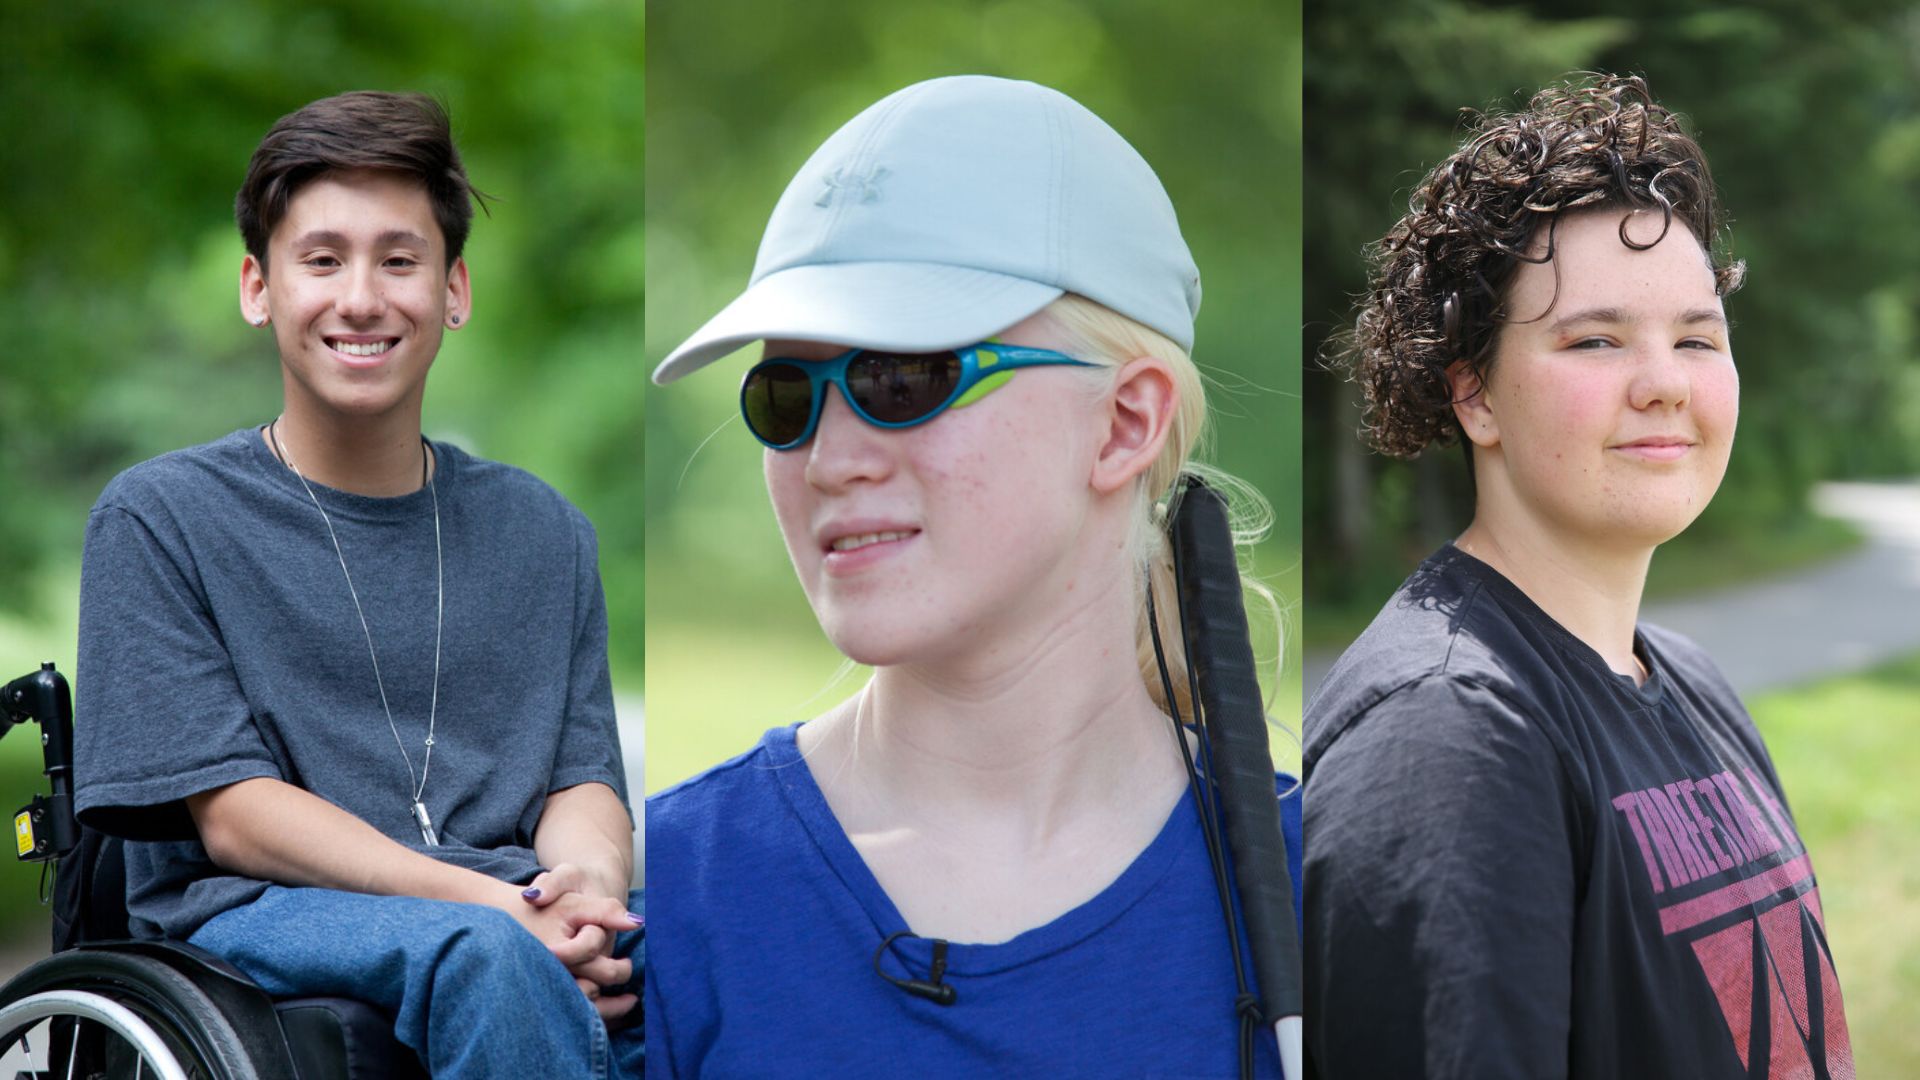 Headshots of Tai, Elena and Jaelyn. Tai has short brown hair and is using a wheelchair, Elena is wearing a white hat and sunglasses and has a cane. Jaelyn has dark curly hair and is wearing a black t-shirt.